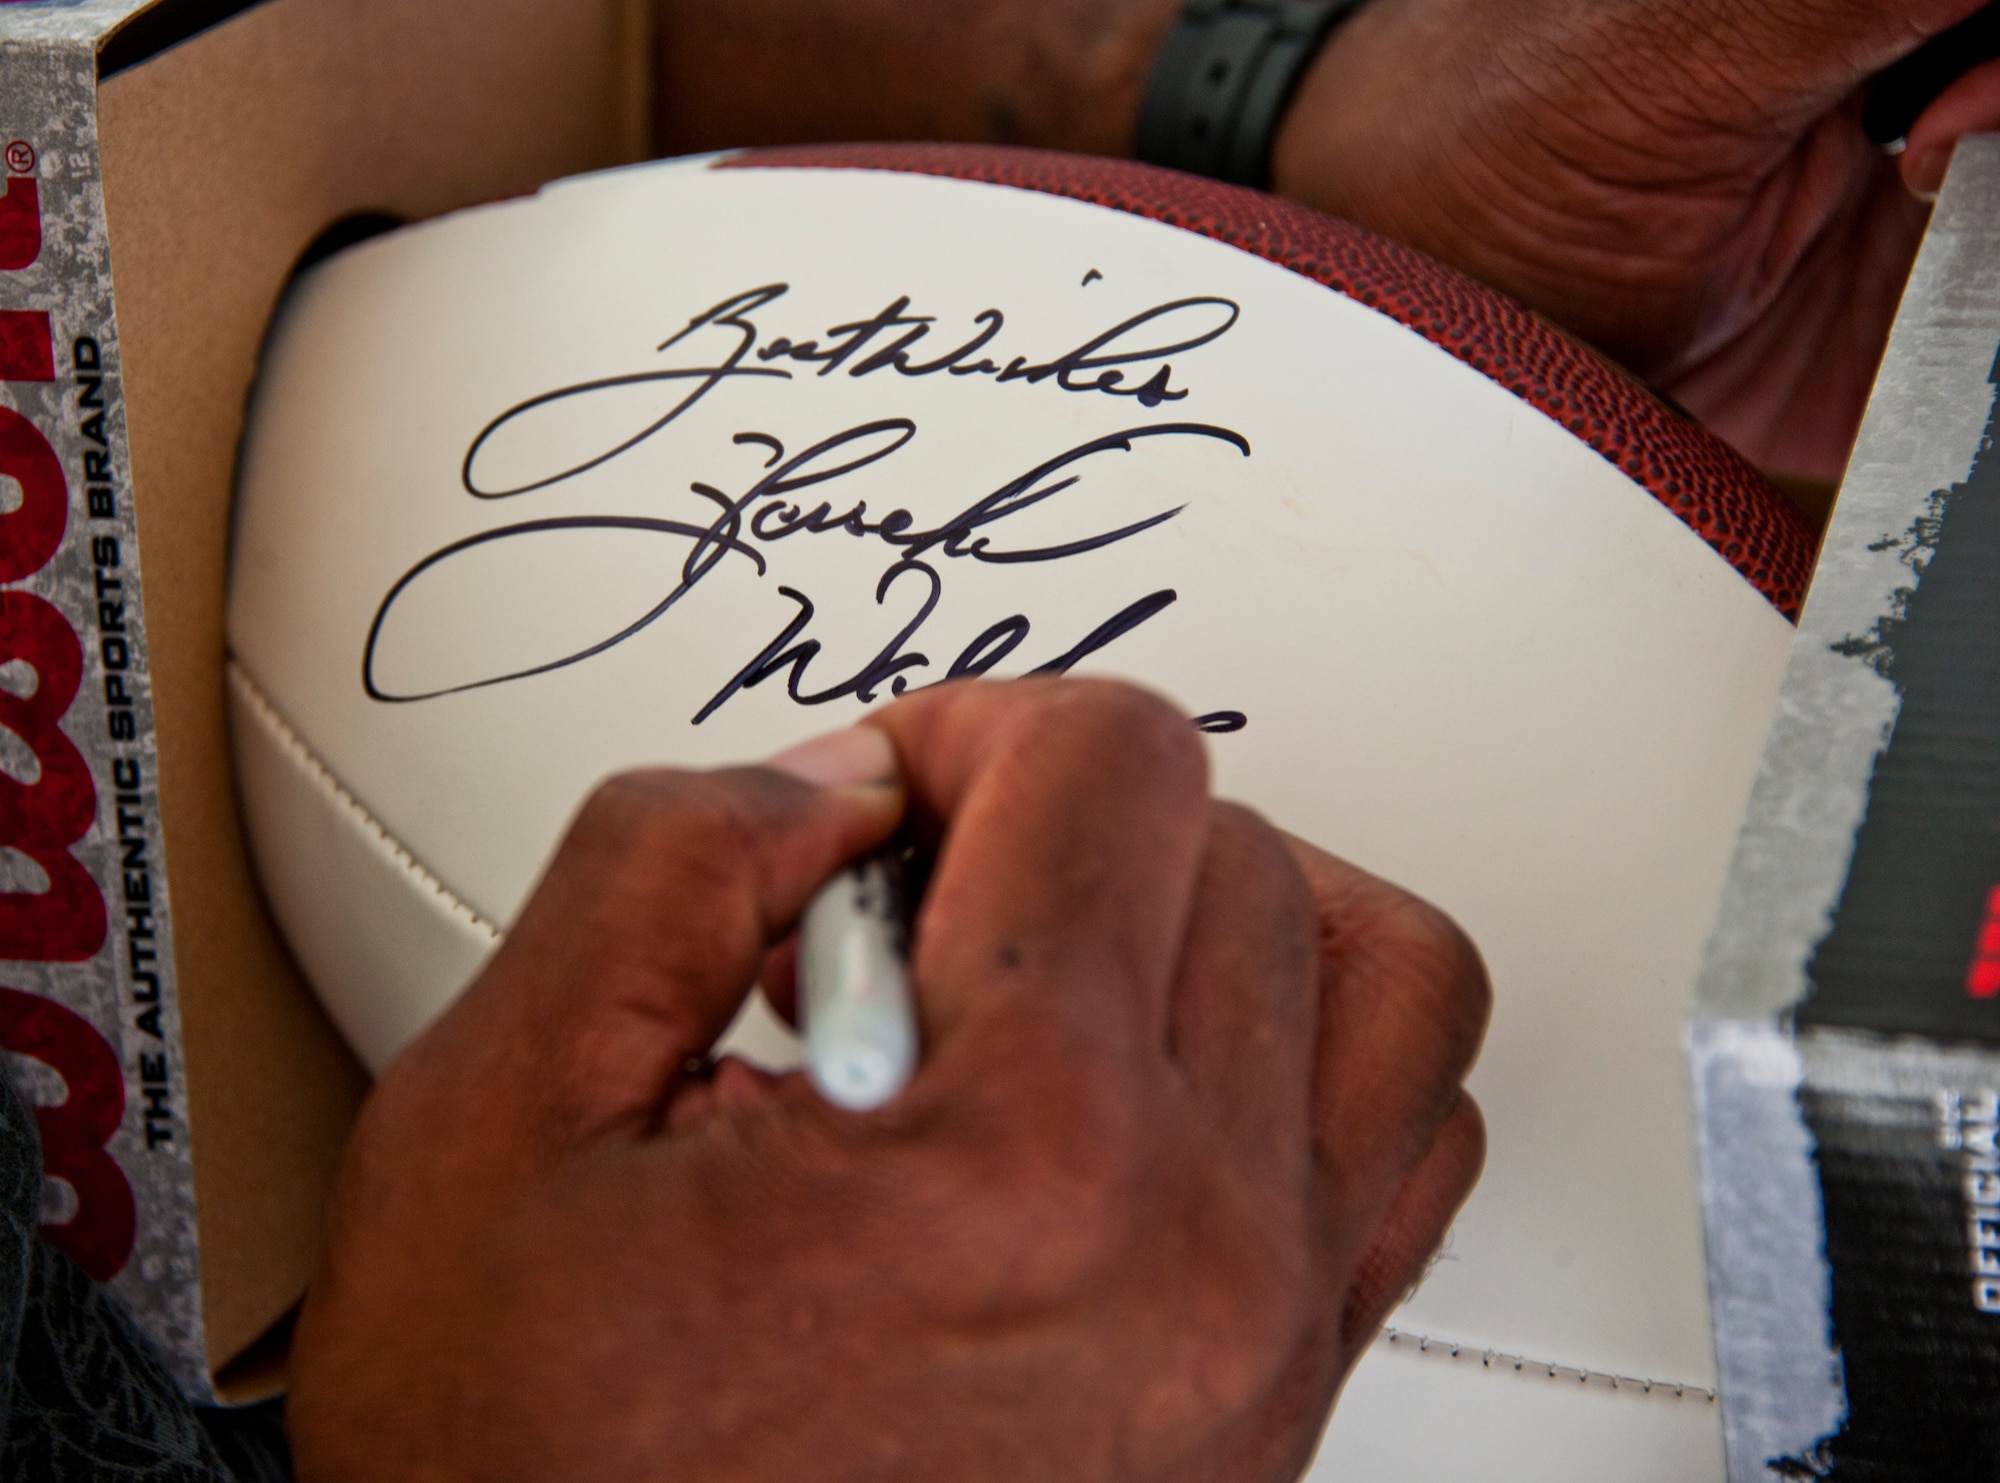 Herschel Walker signs a football for a fan March 22 at Eglin Air Force Base, Fla.  Walker visited the base to speak about resiliency and the importance of asking for help. He spoke twice to large crowds of Team Eglin members about his life, career and the emotional and mental struggles he encountered throughout.  (U.S. Air Force photo/Samuel King Jr.)